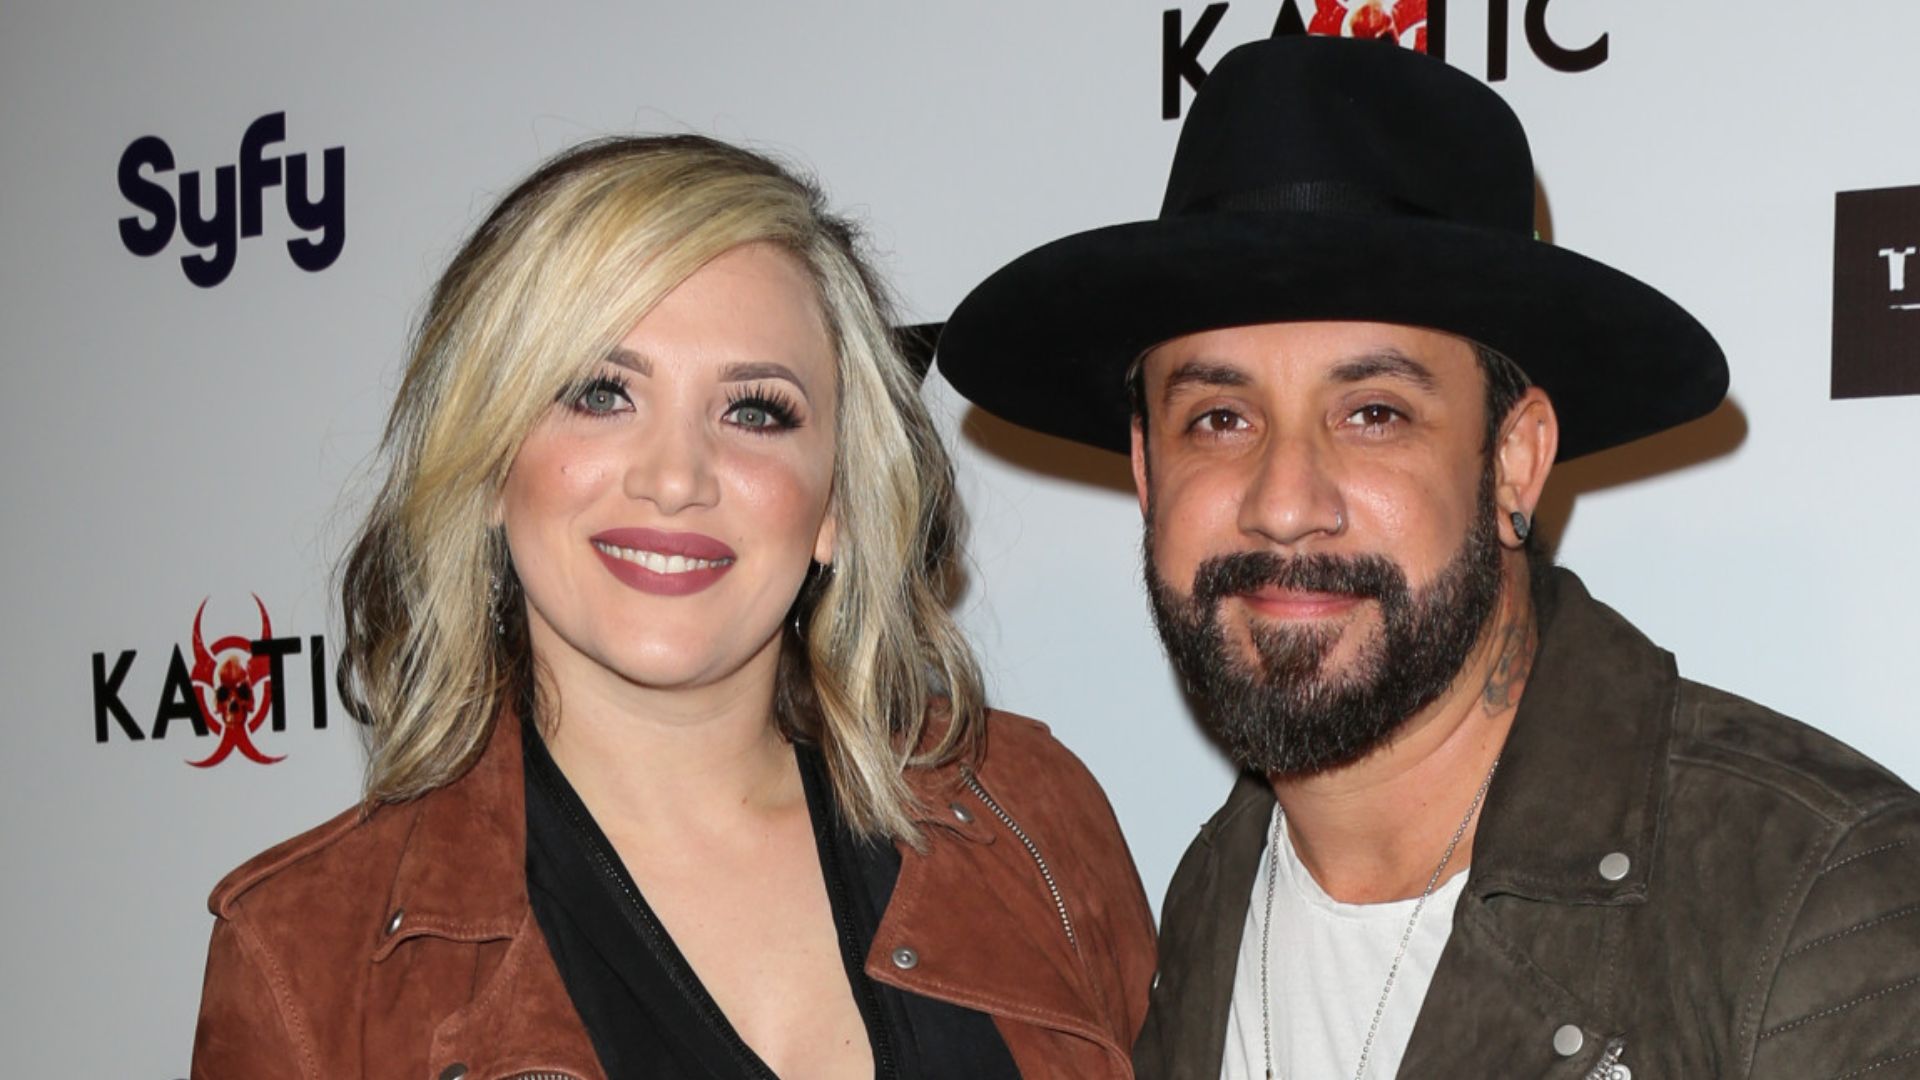 Backstreet Boys’ AJ McLean announces divorce from Rochelle after 12 years of marriage